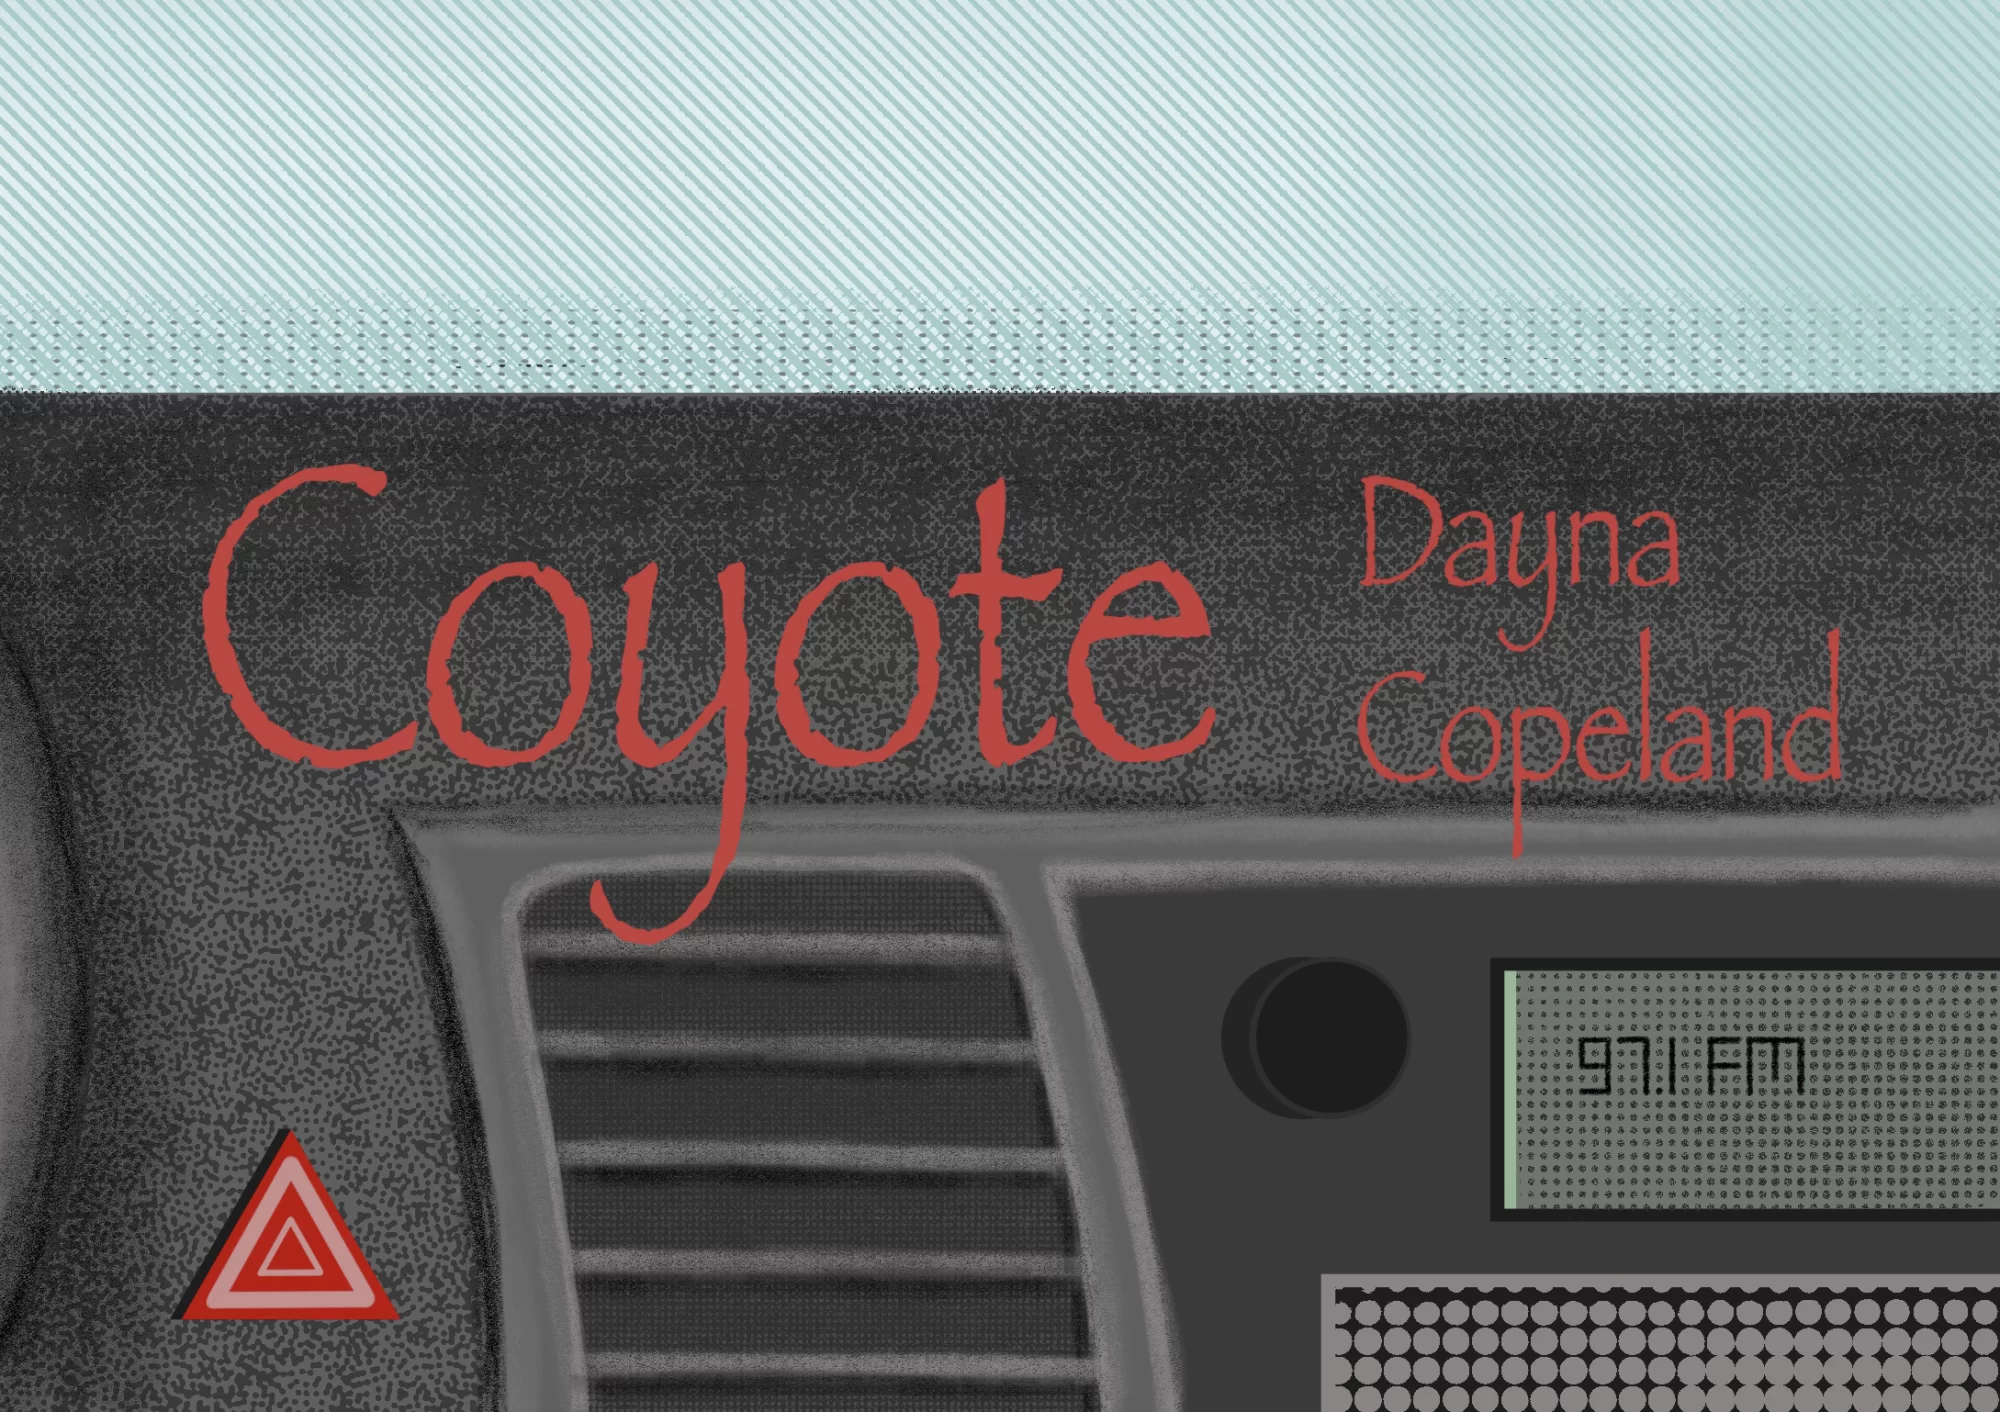 Coyote by Dayna Copeland